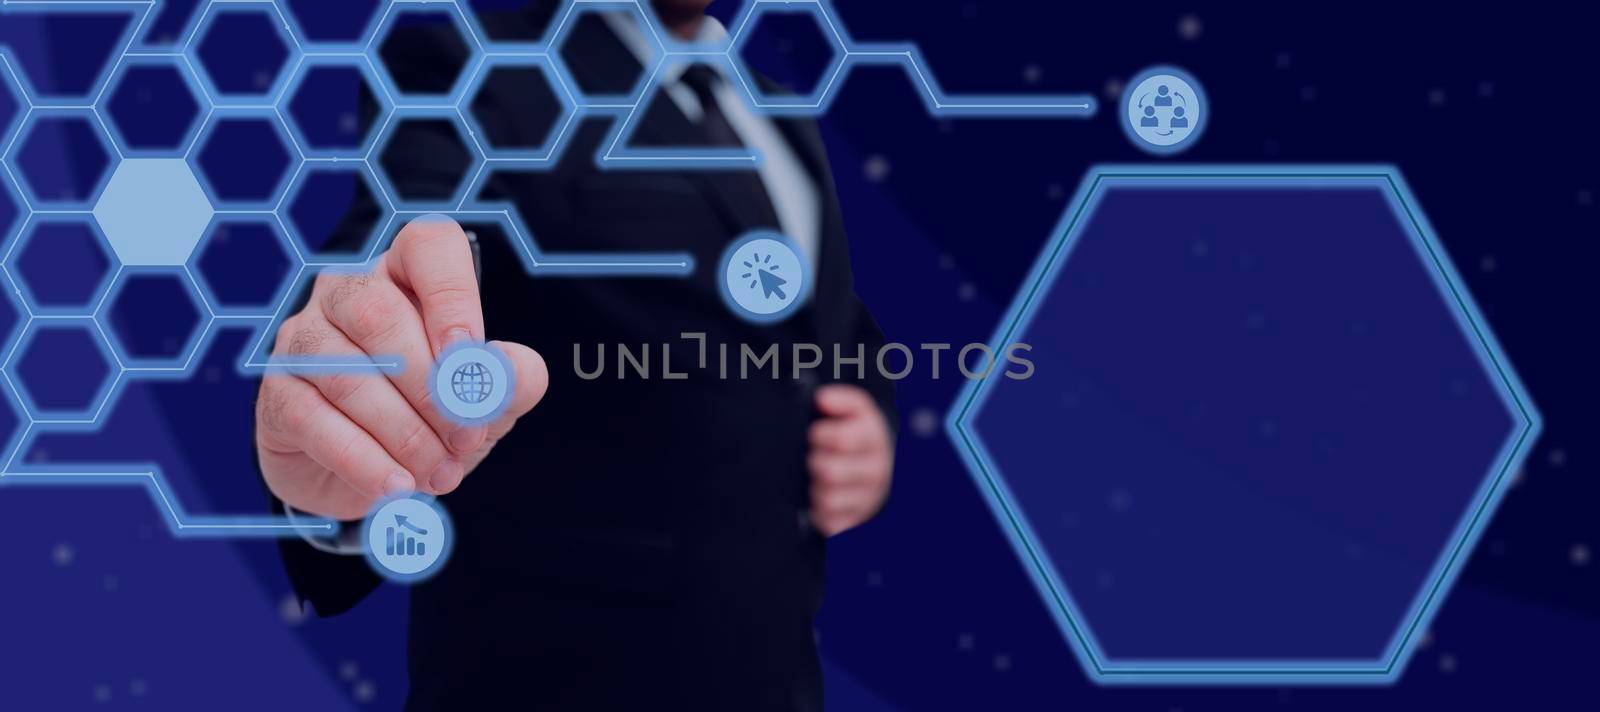 Businessman With A Pen And Pointing On Digital Symbols In A Glowing Hexagon Pattern. Man In A Suit Displaying Crucial Digital Information And Wireless Technology. by nialowwa